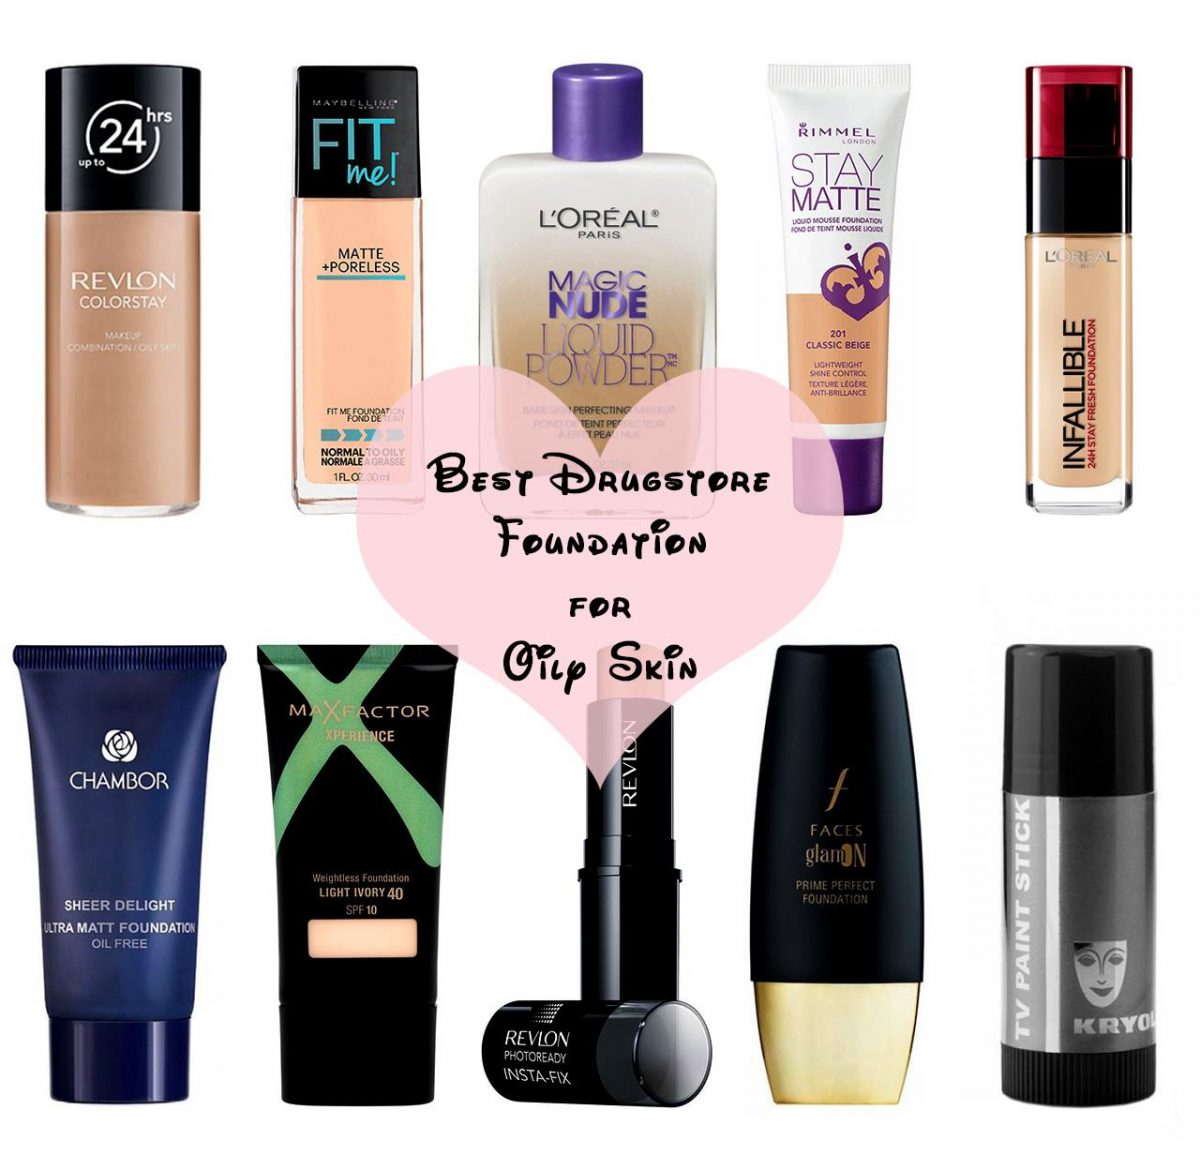 Best Drugstore Foundation for Oily Skin in India